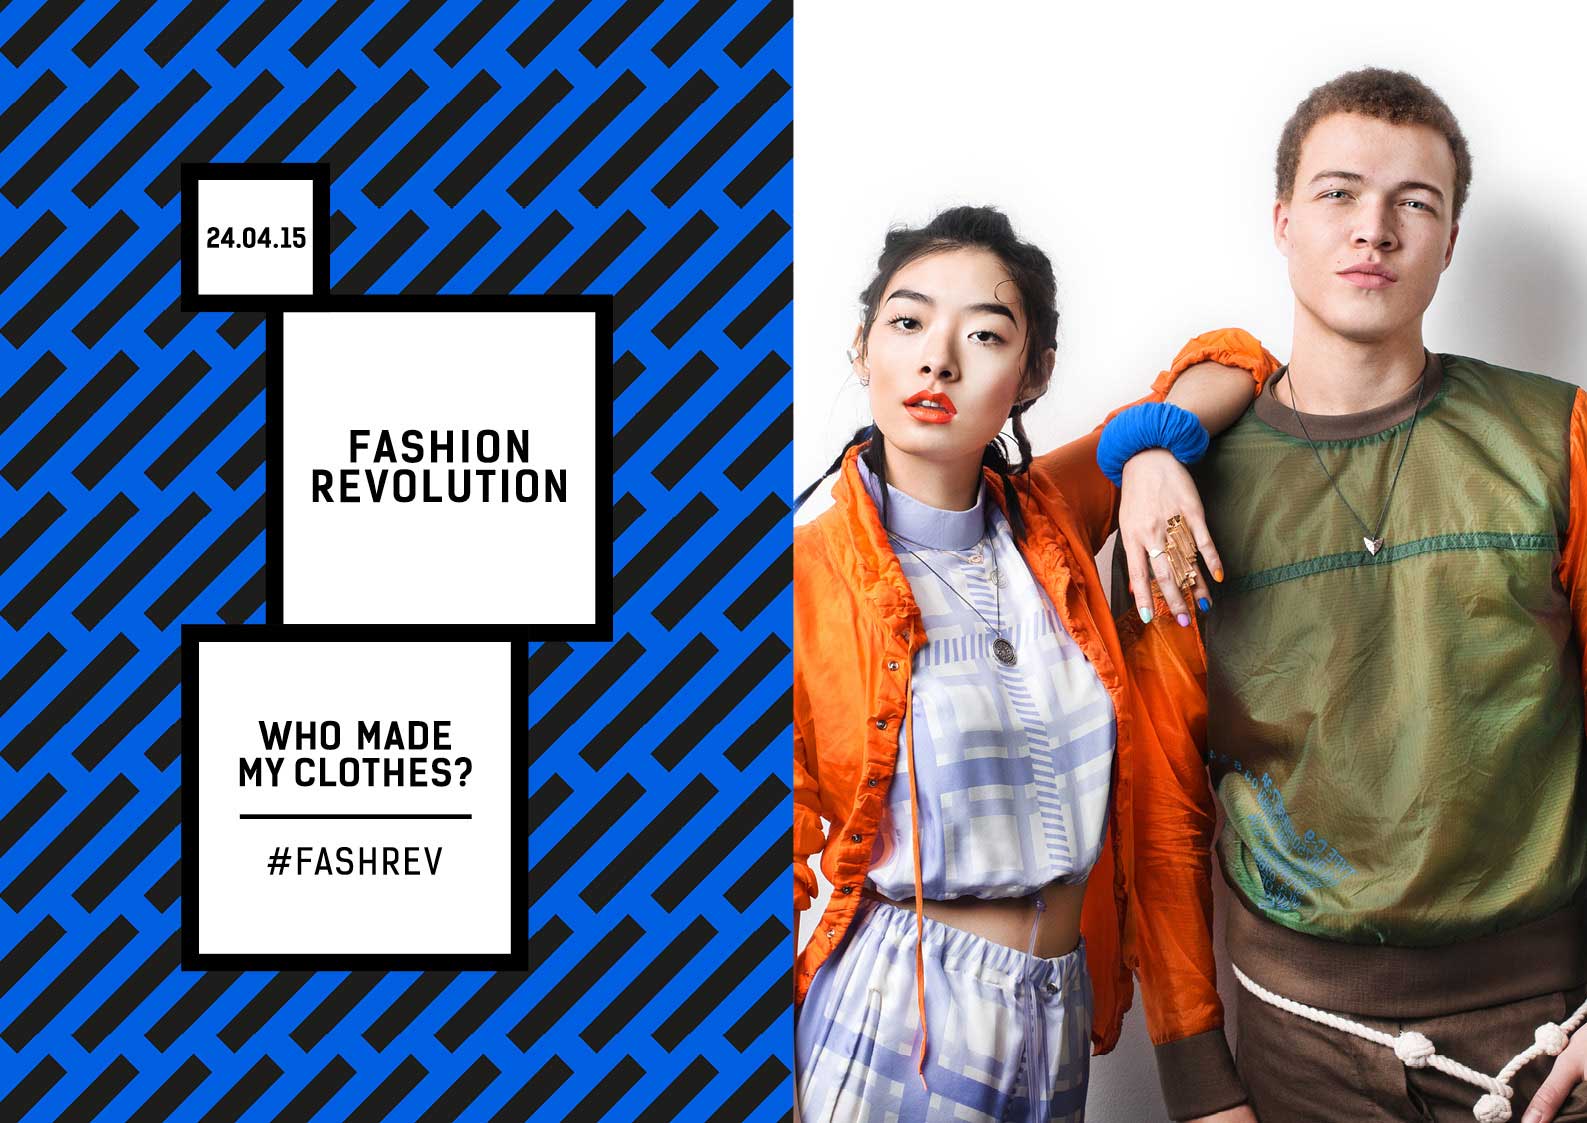 Why Fashion Students Should Get Involved With Fashion Revolution Day